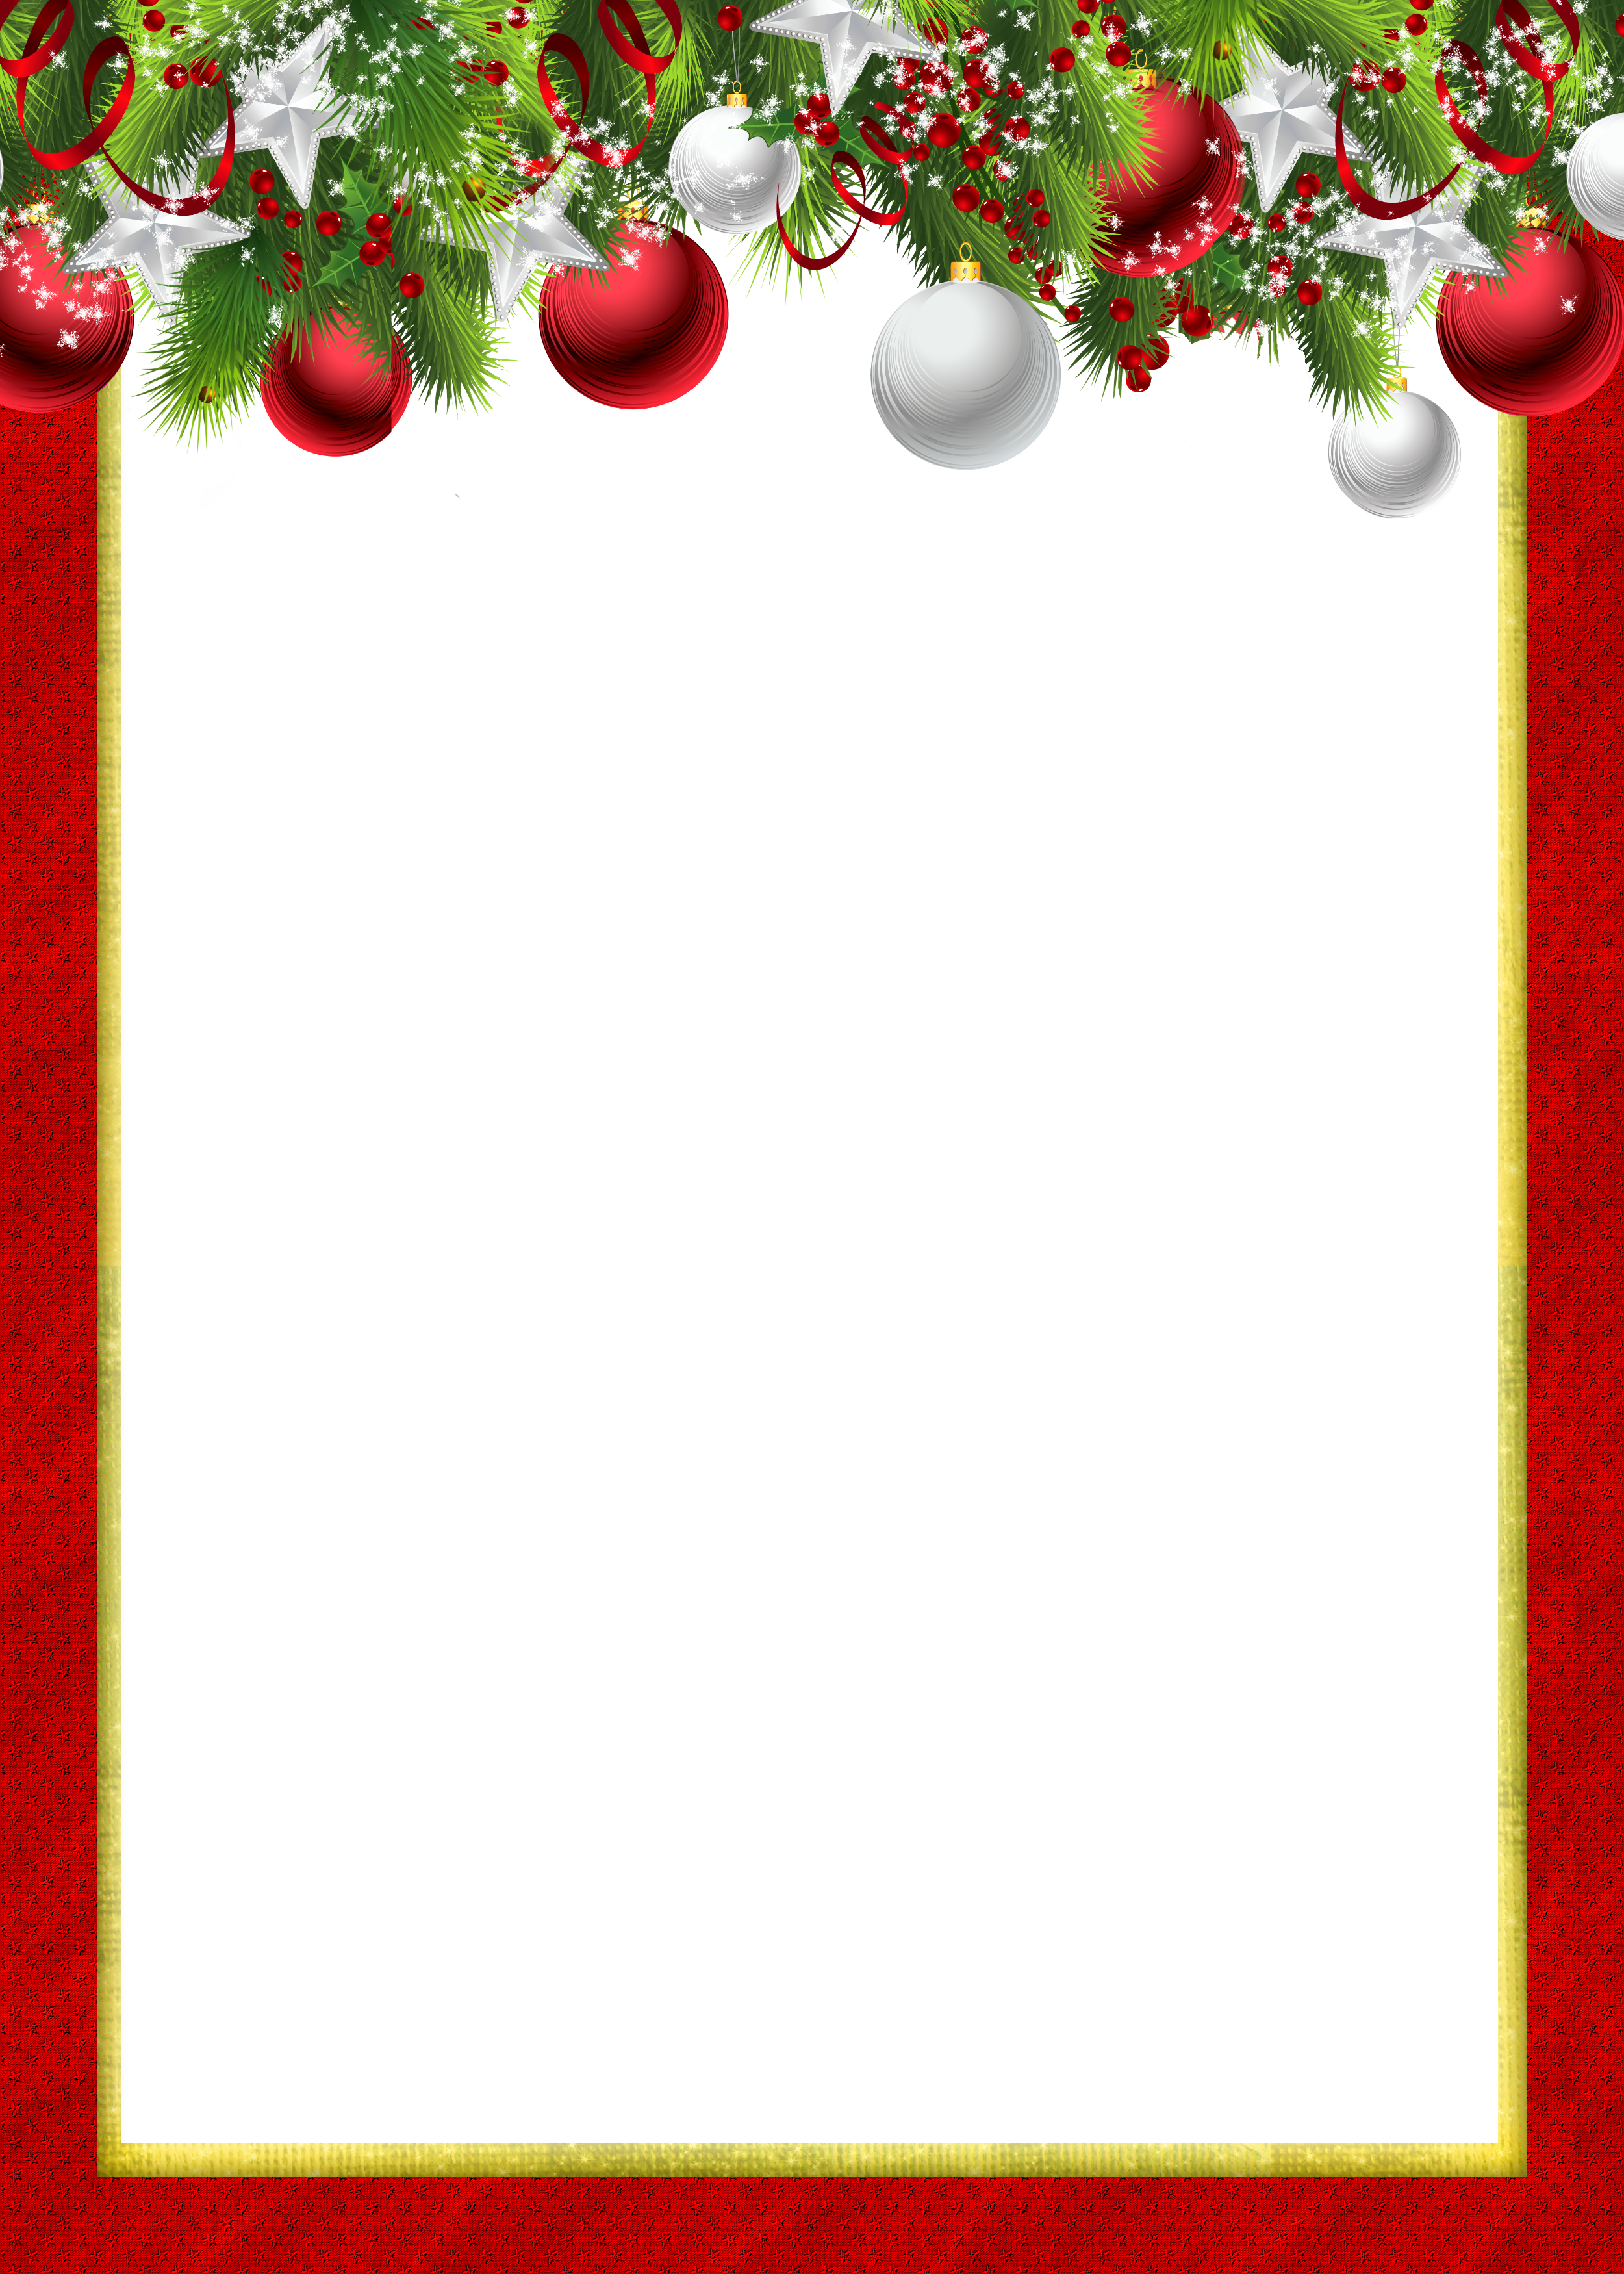 clipart christmas picture frames - photo #16